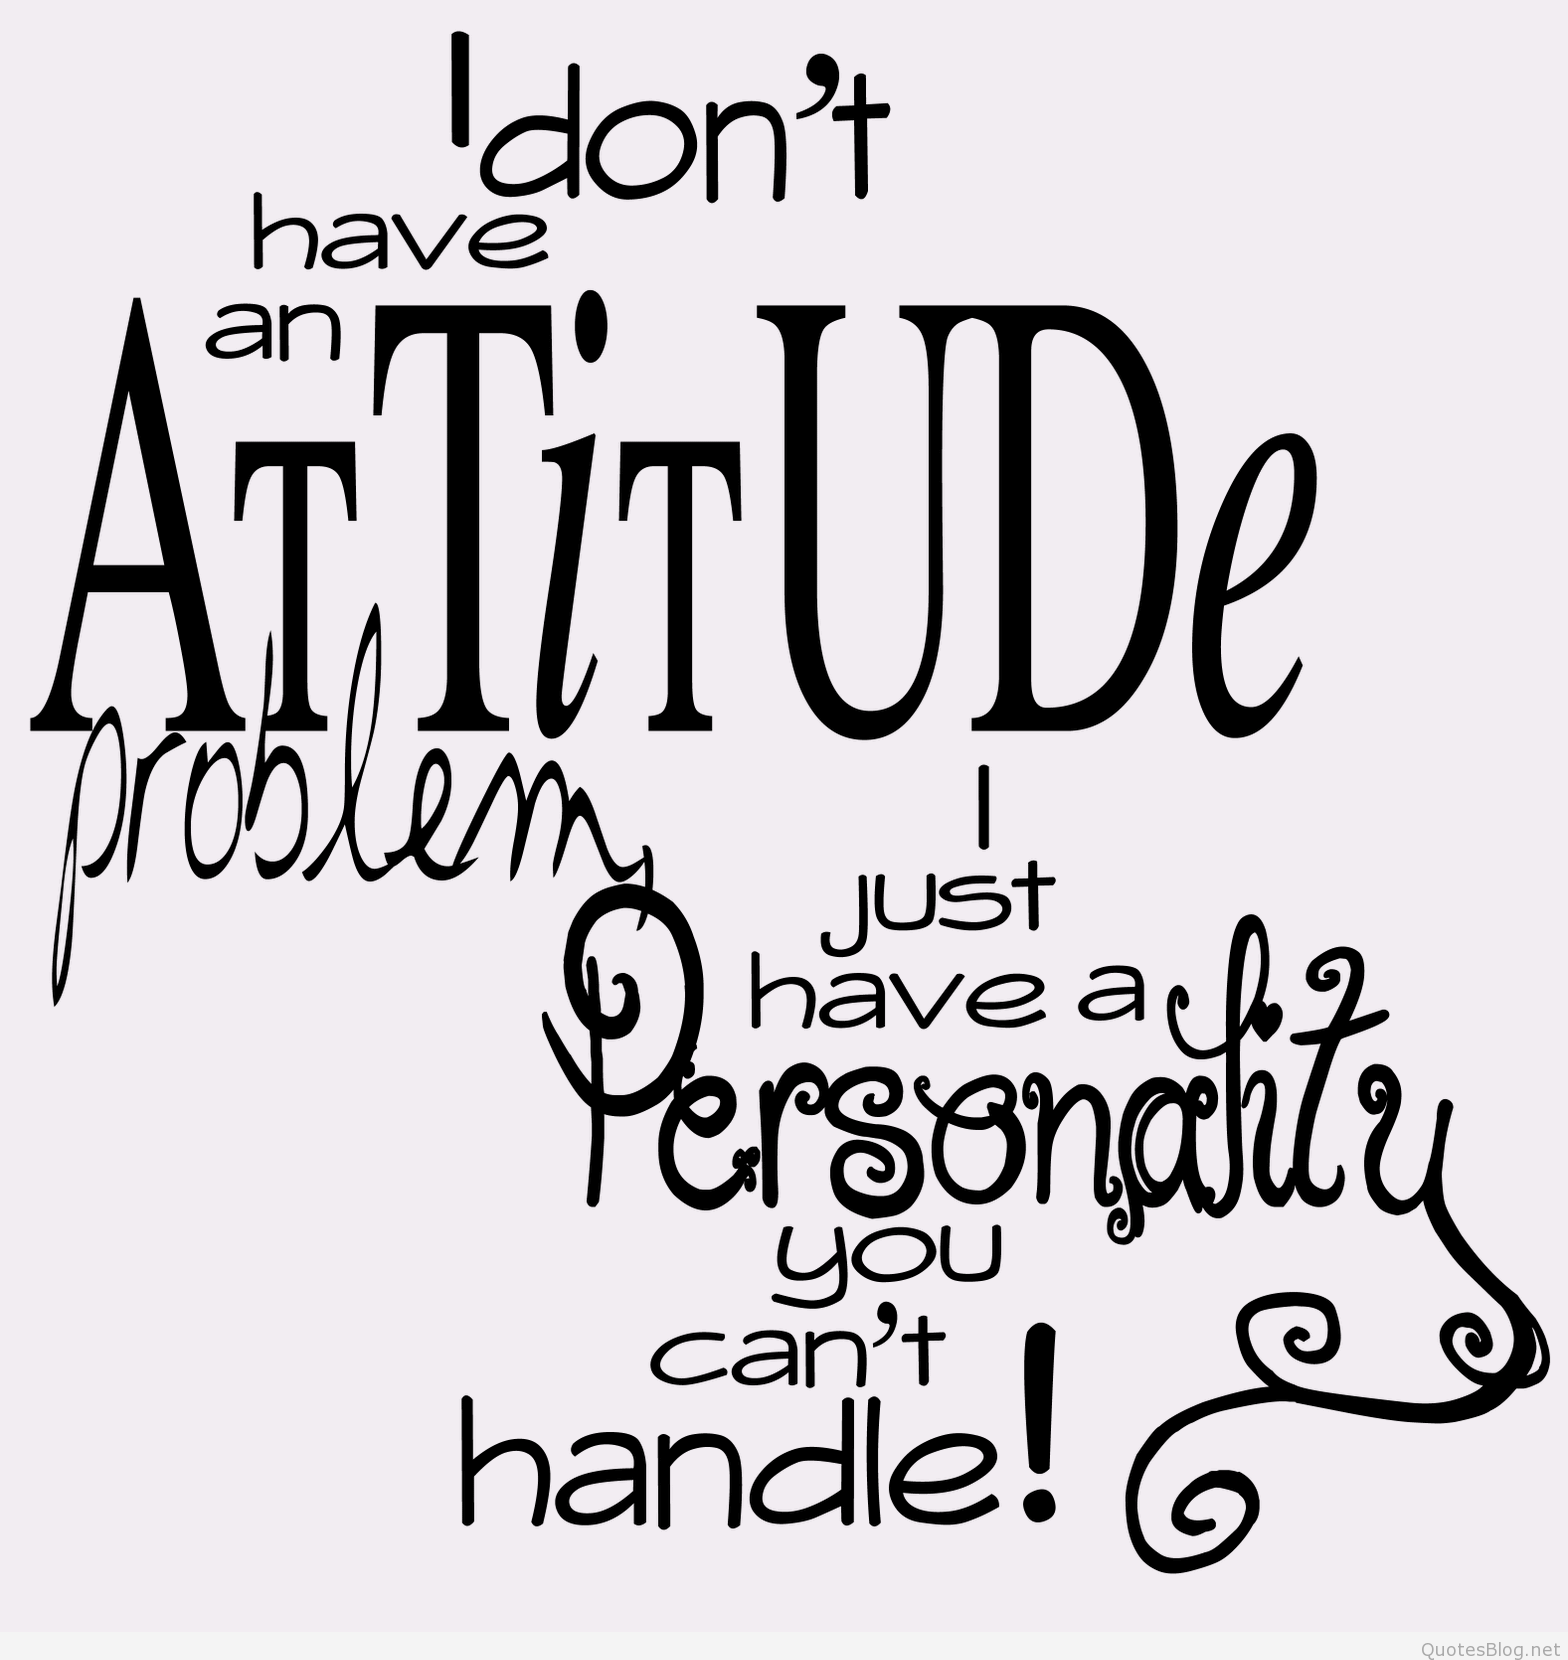 I don't have an attitude problem, just have a personality you can't handle!